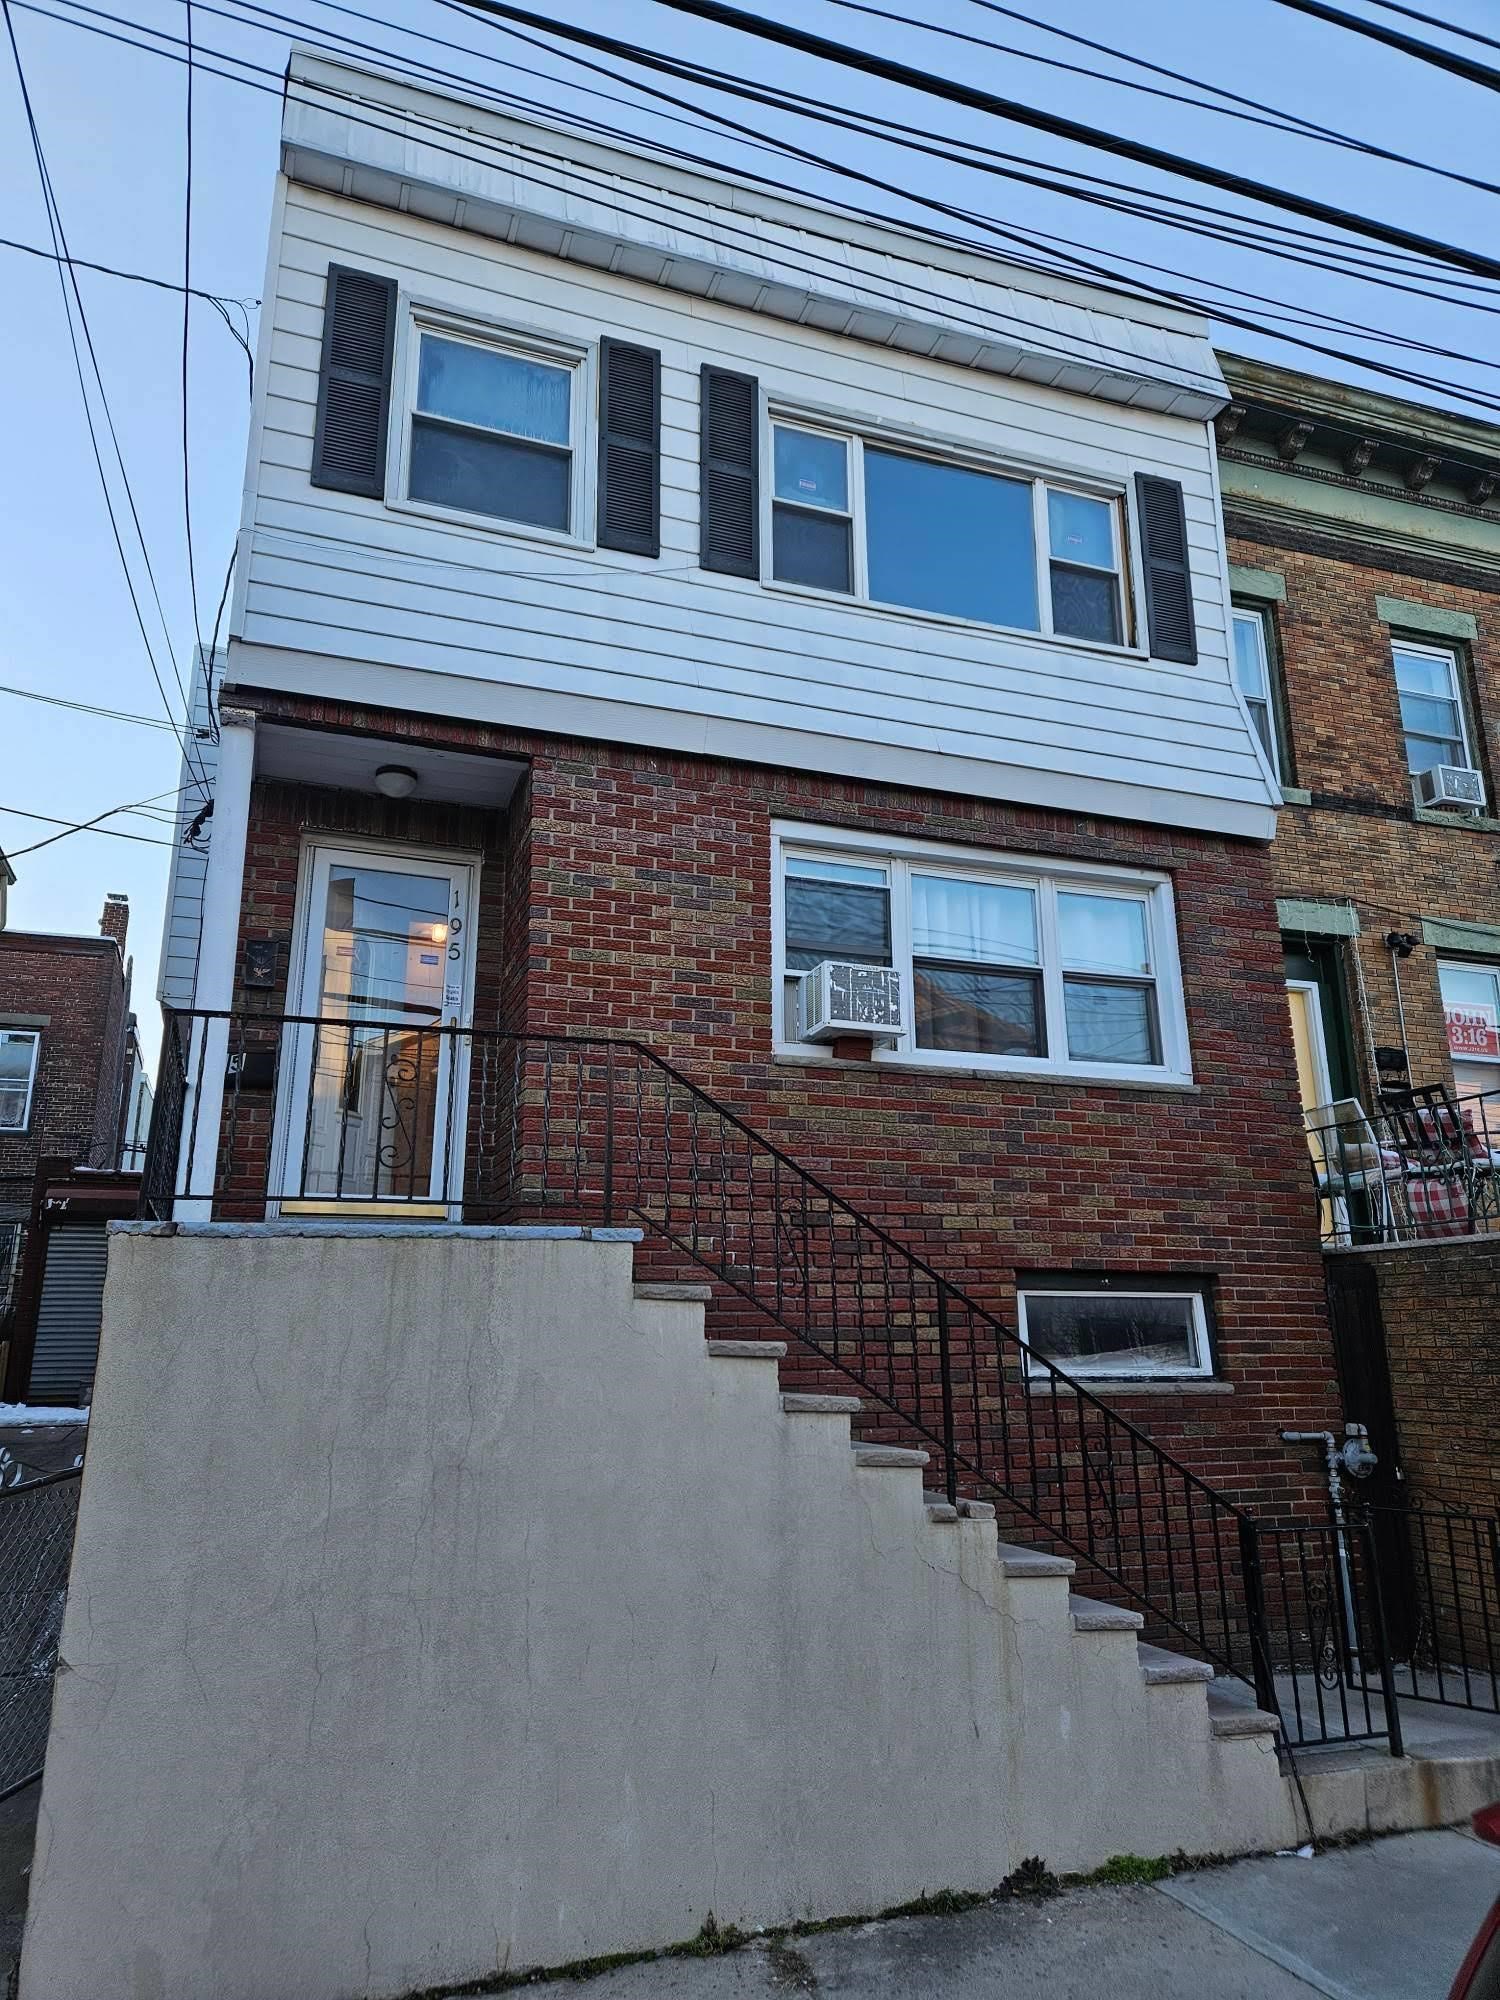 # 240003192 - For Rent in JERSEY CITY - Heights NJ